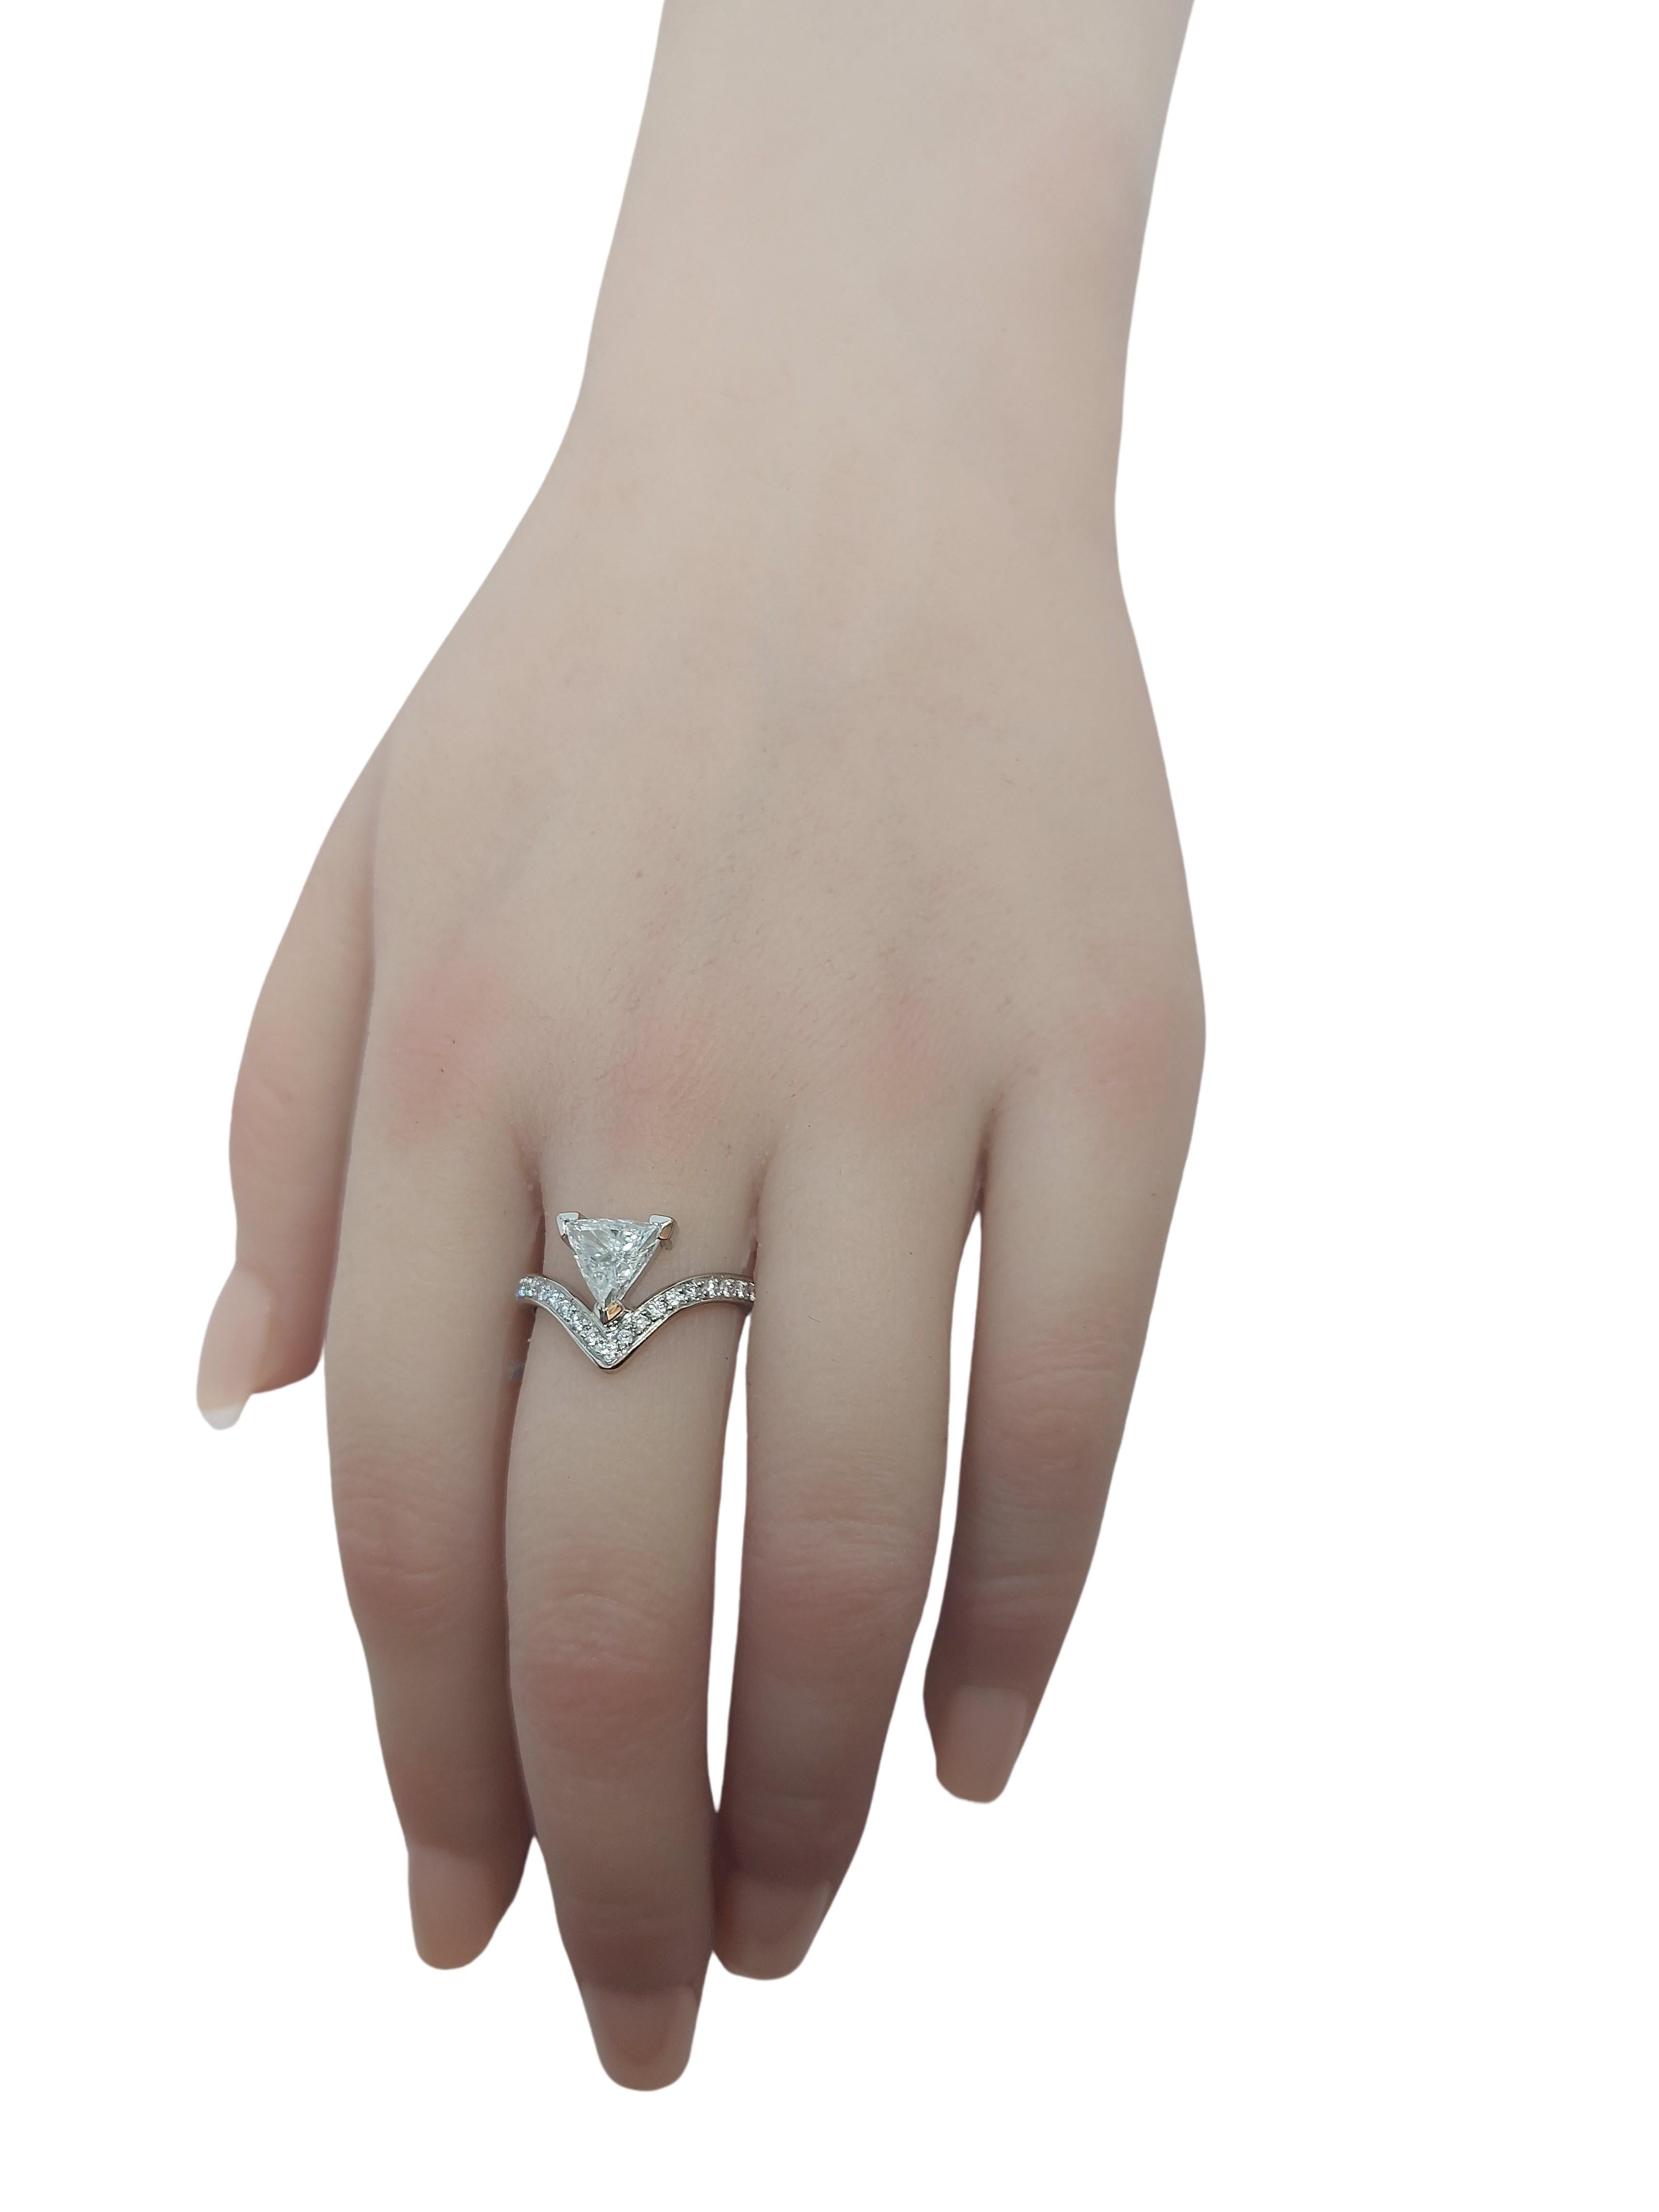 18kt White Gold Ring with 1.02ct Triangle Diamond & 0.4ct Brilliant Cut Diamonds For Sale 2